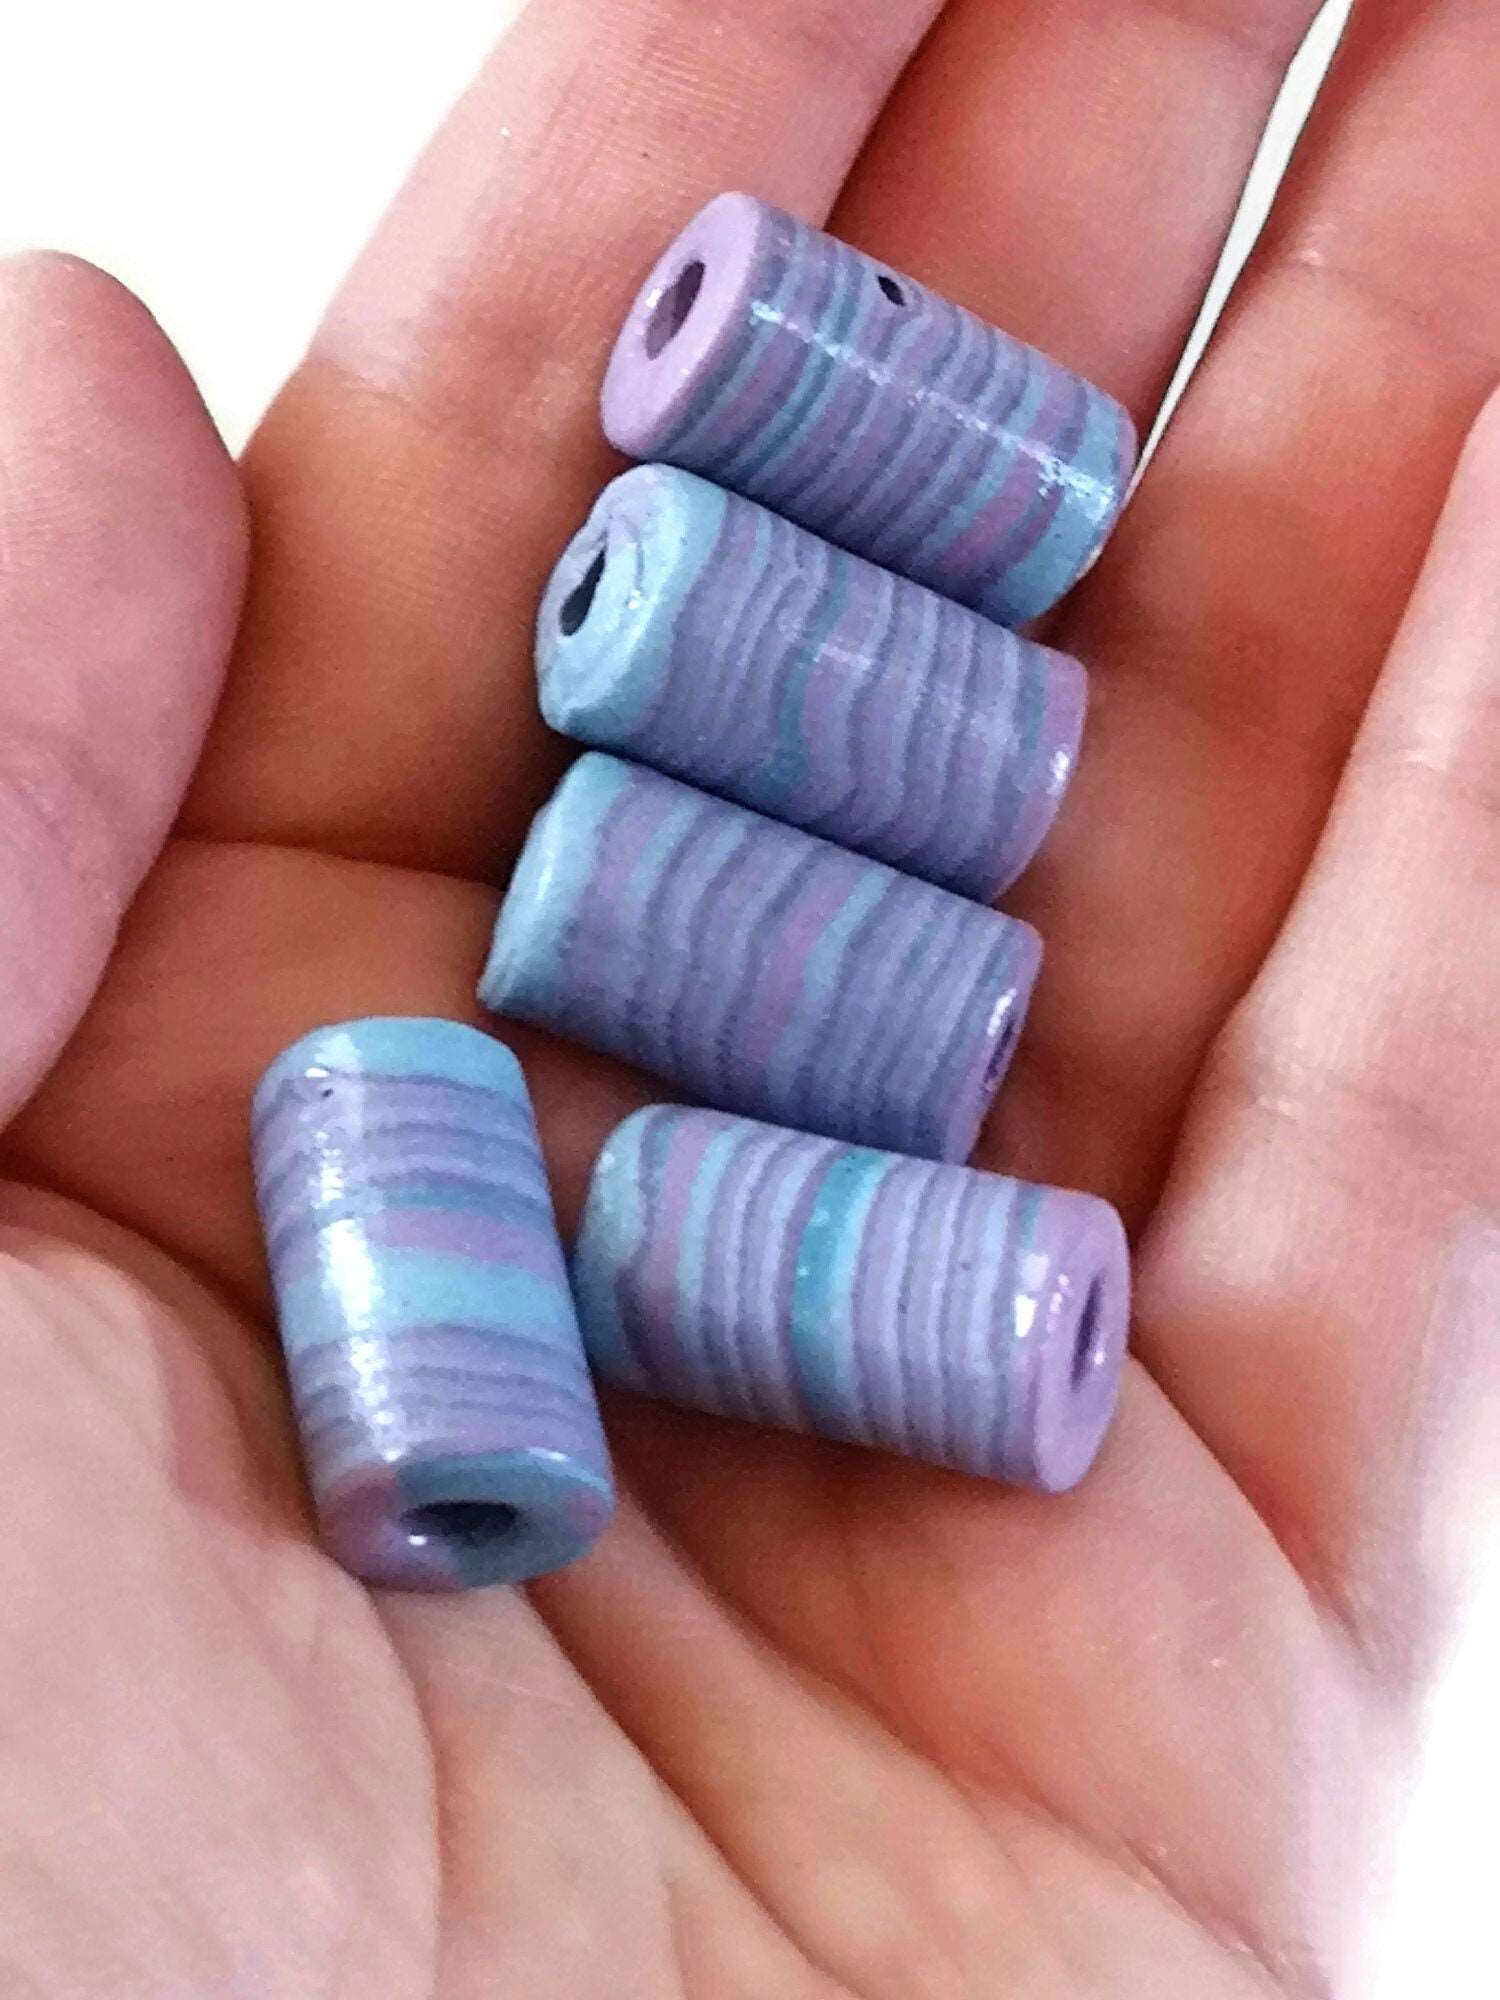 1 Pc Large Handmade Ceramic Tube Beads for Jewelry Making, Artisan Purple and Blue Macrame Beads 4mm Hole, Unique Beard Beads for Hair Braid